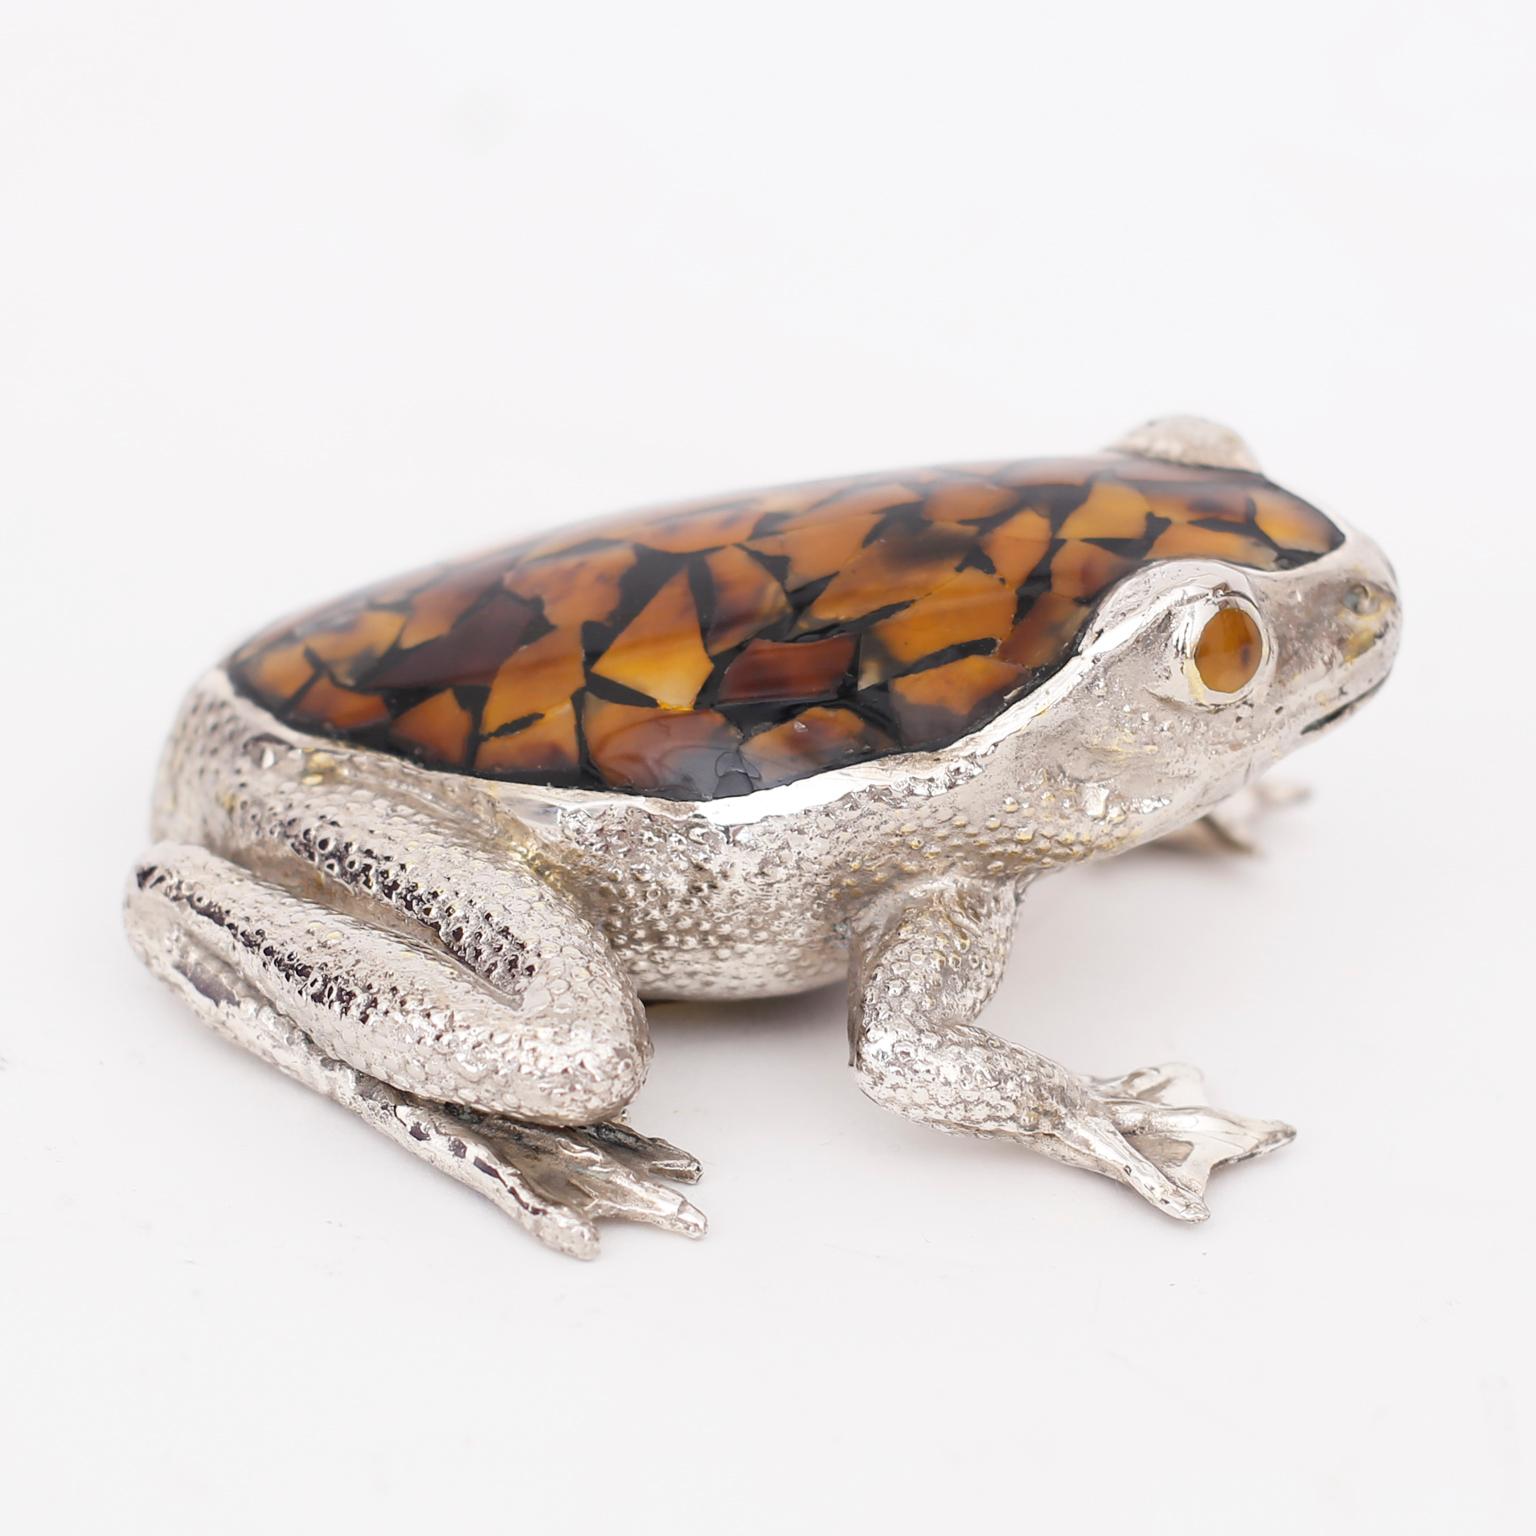 Mid century frog sculpture or object of art crafted in penshell and silver plated bronze with stylized appeal. Signed Maitland-Smith on the bottom.